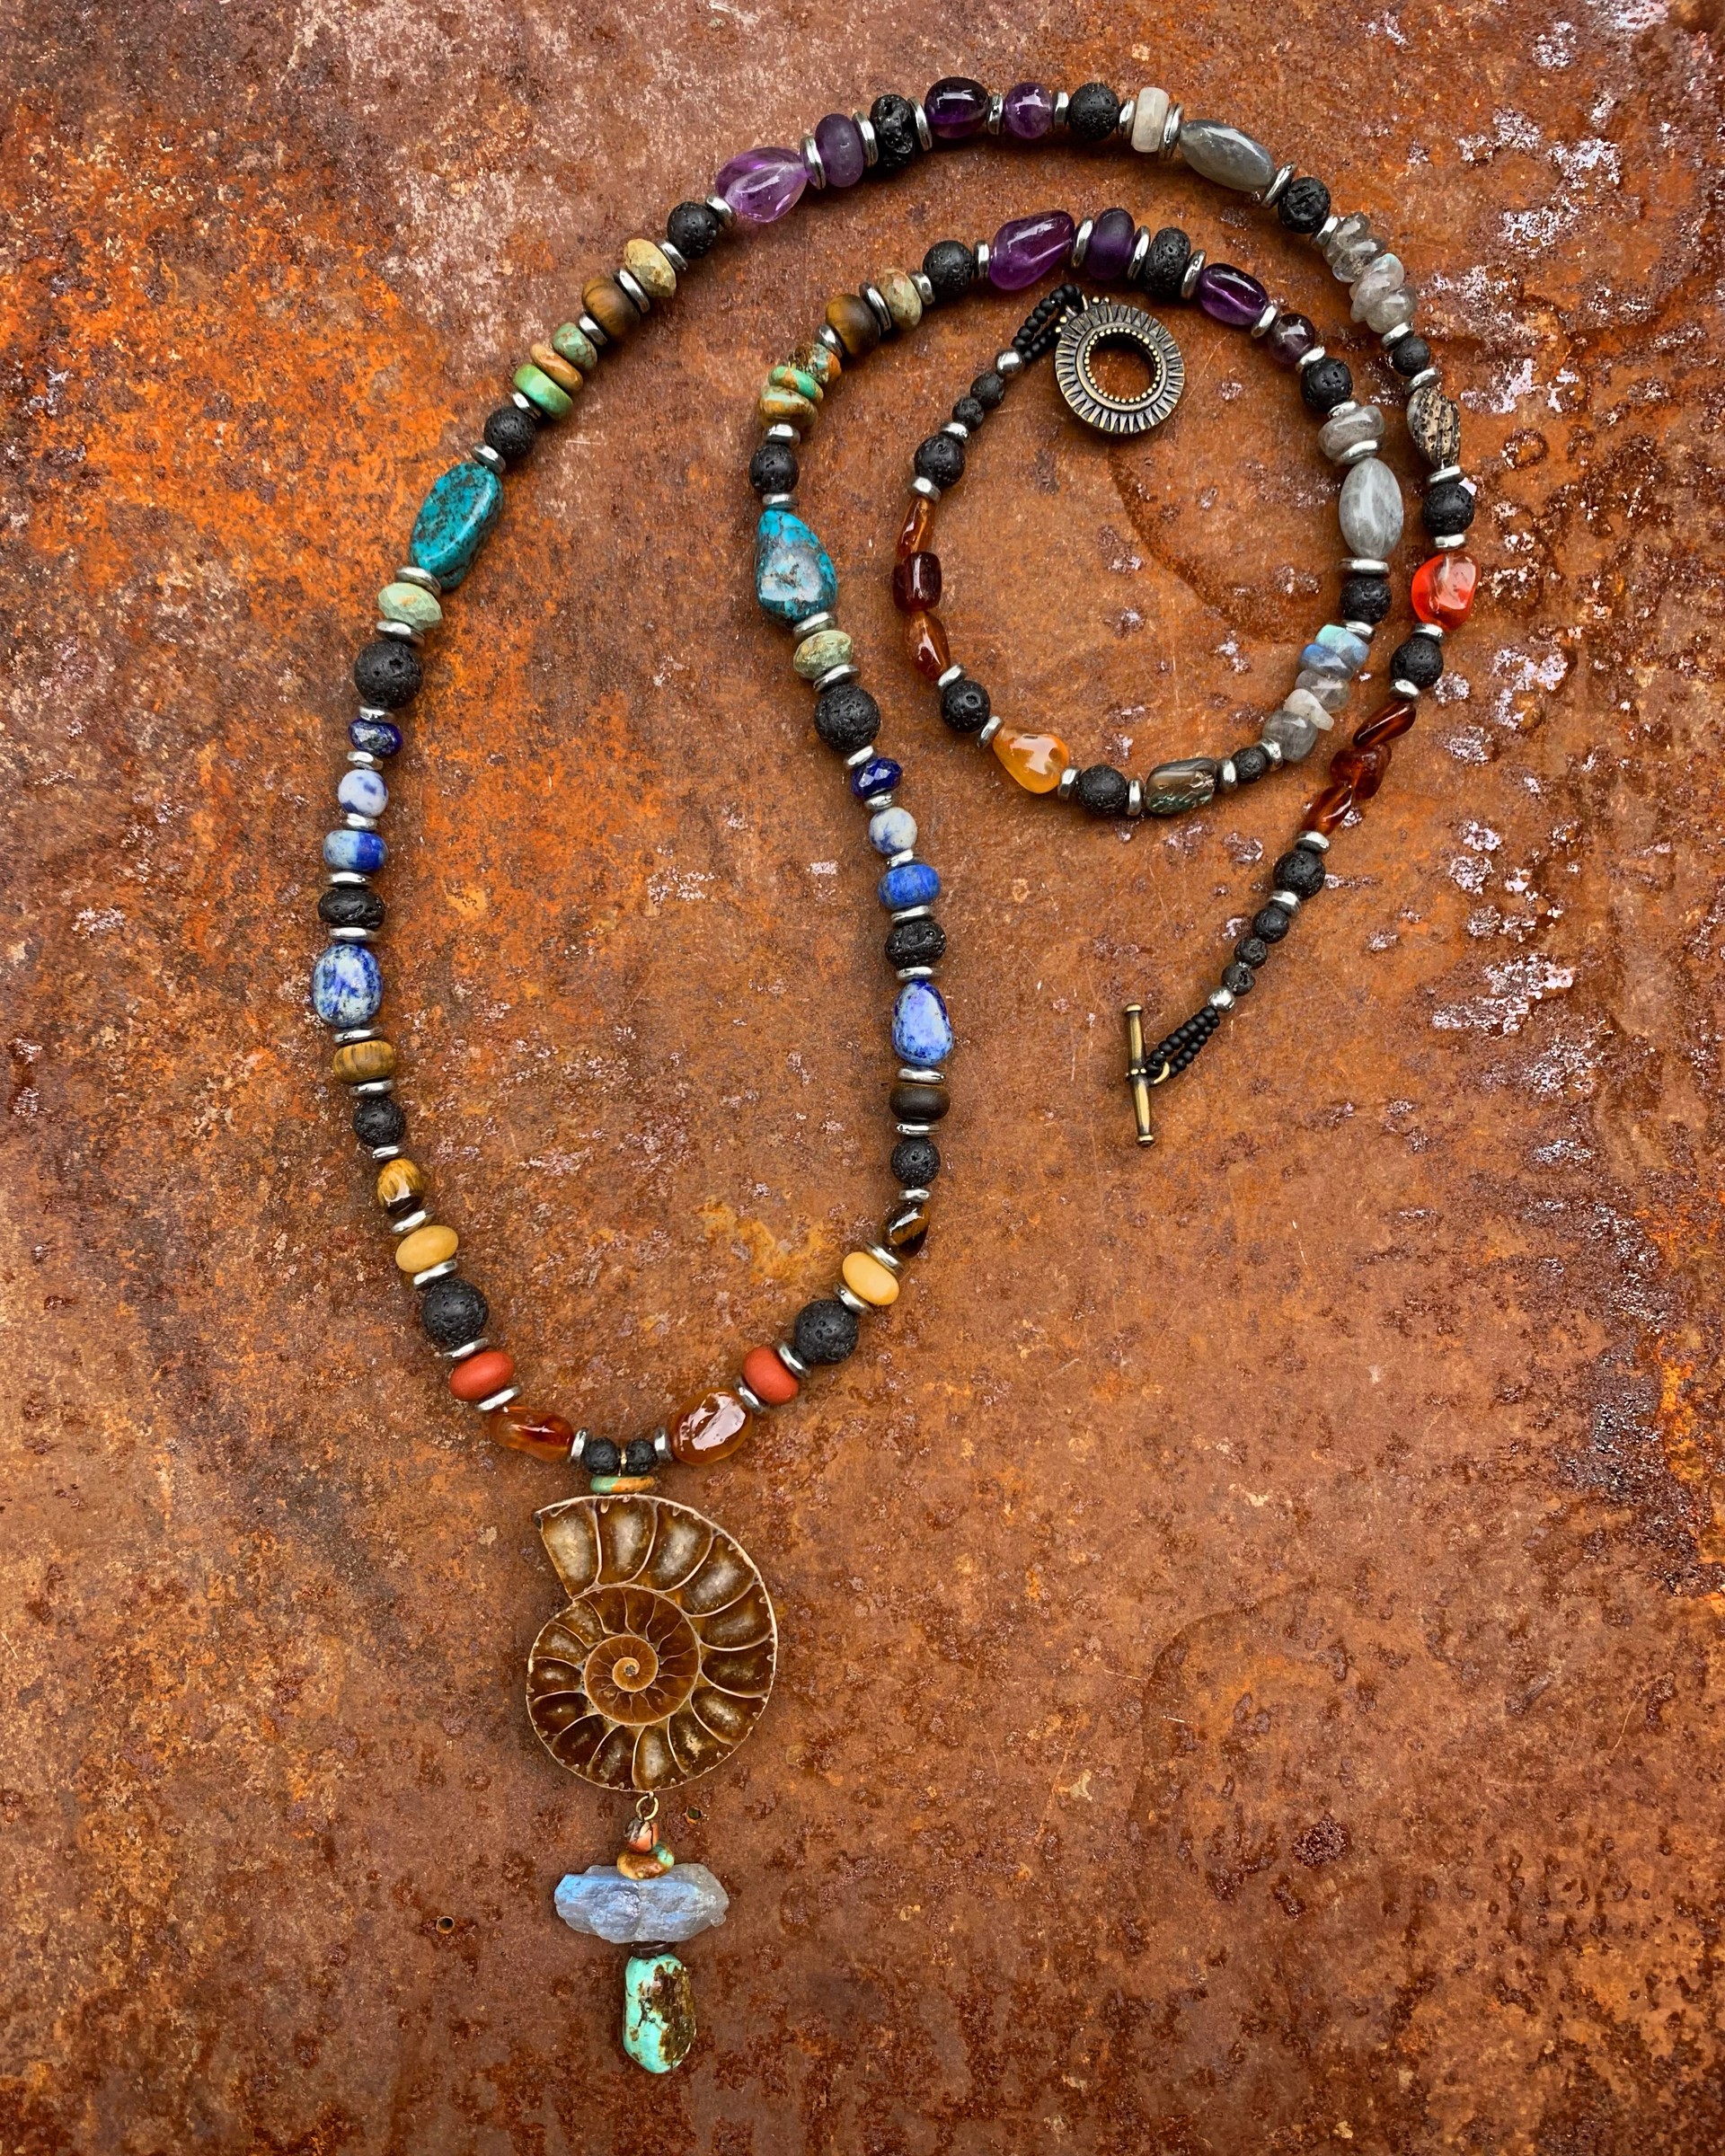 K493 Earth Rainbow Ammonite Necklace by Kelly Ormsby